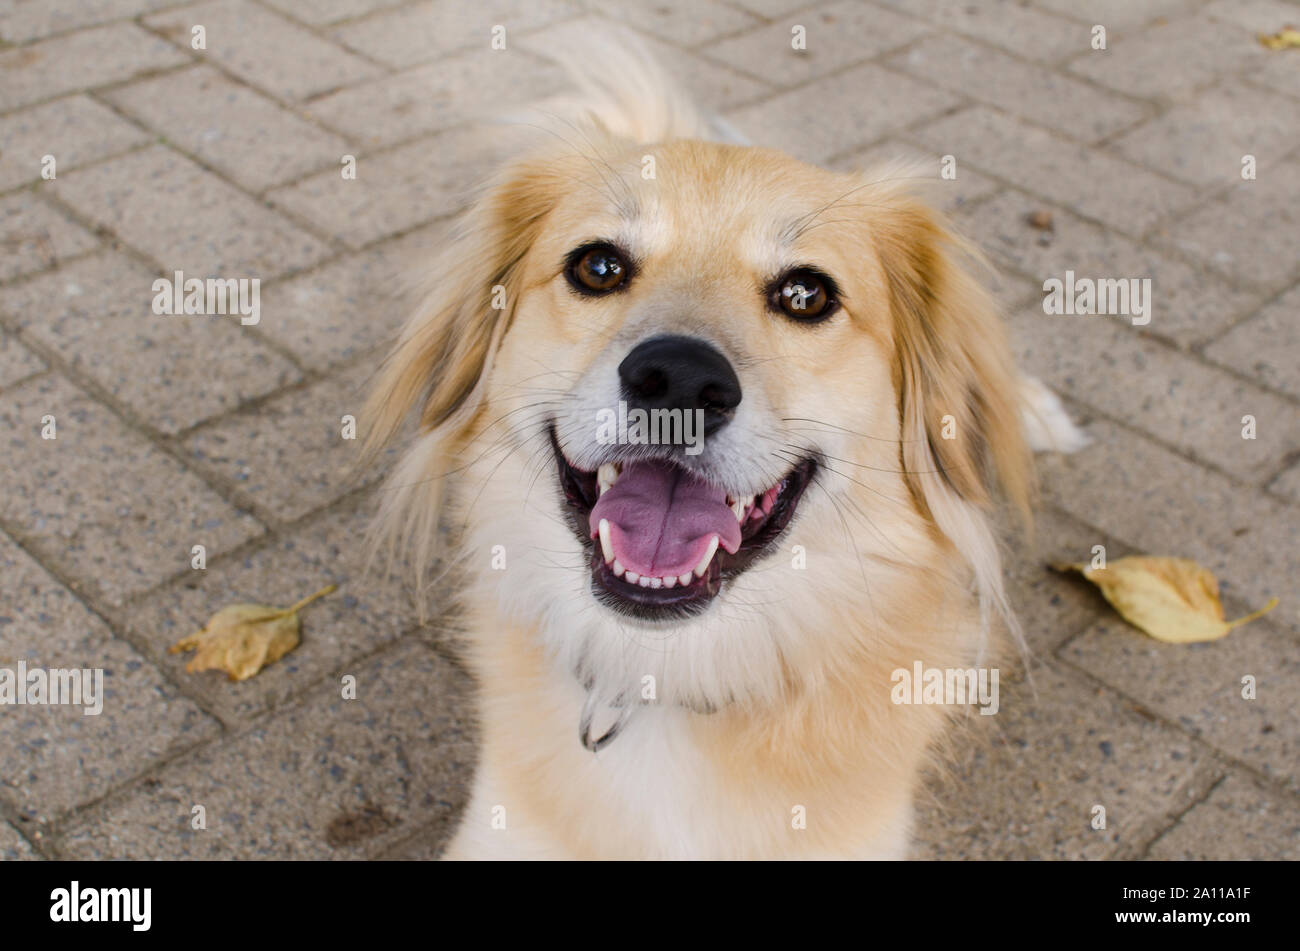 close up of a blonde or golden haired cute friendly dog smiling or looking at the camera with bokeh effect and sharp on tongue and nose. Stock Photo